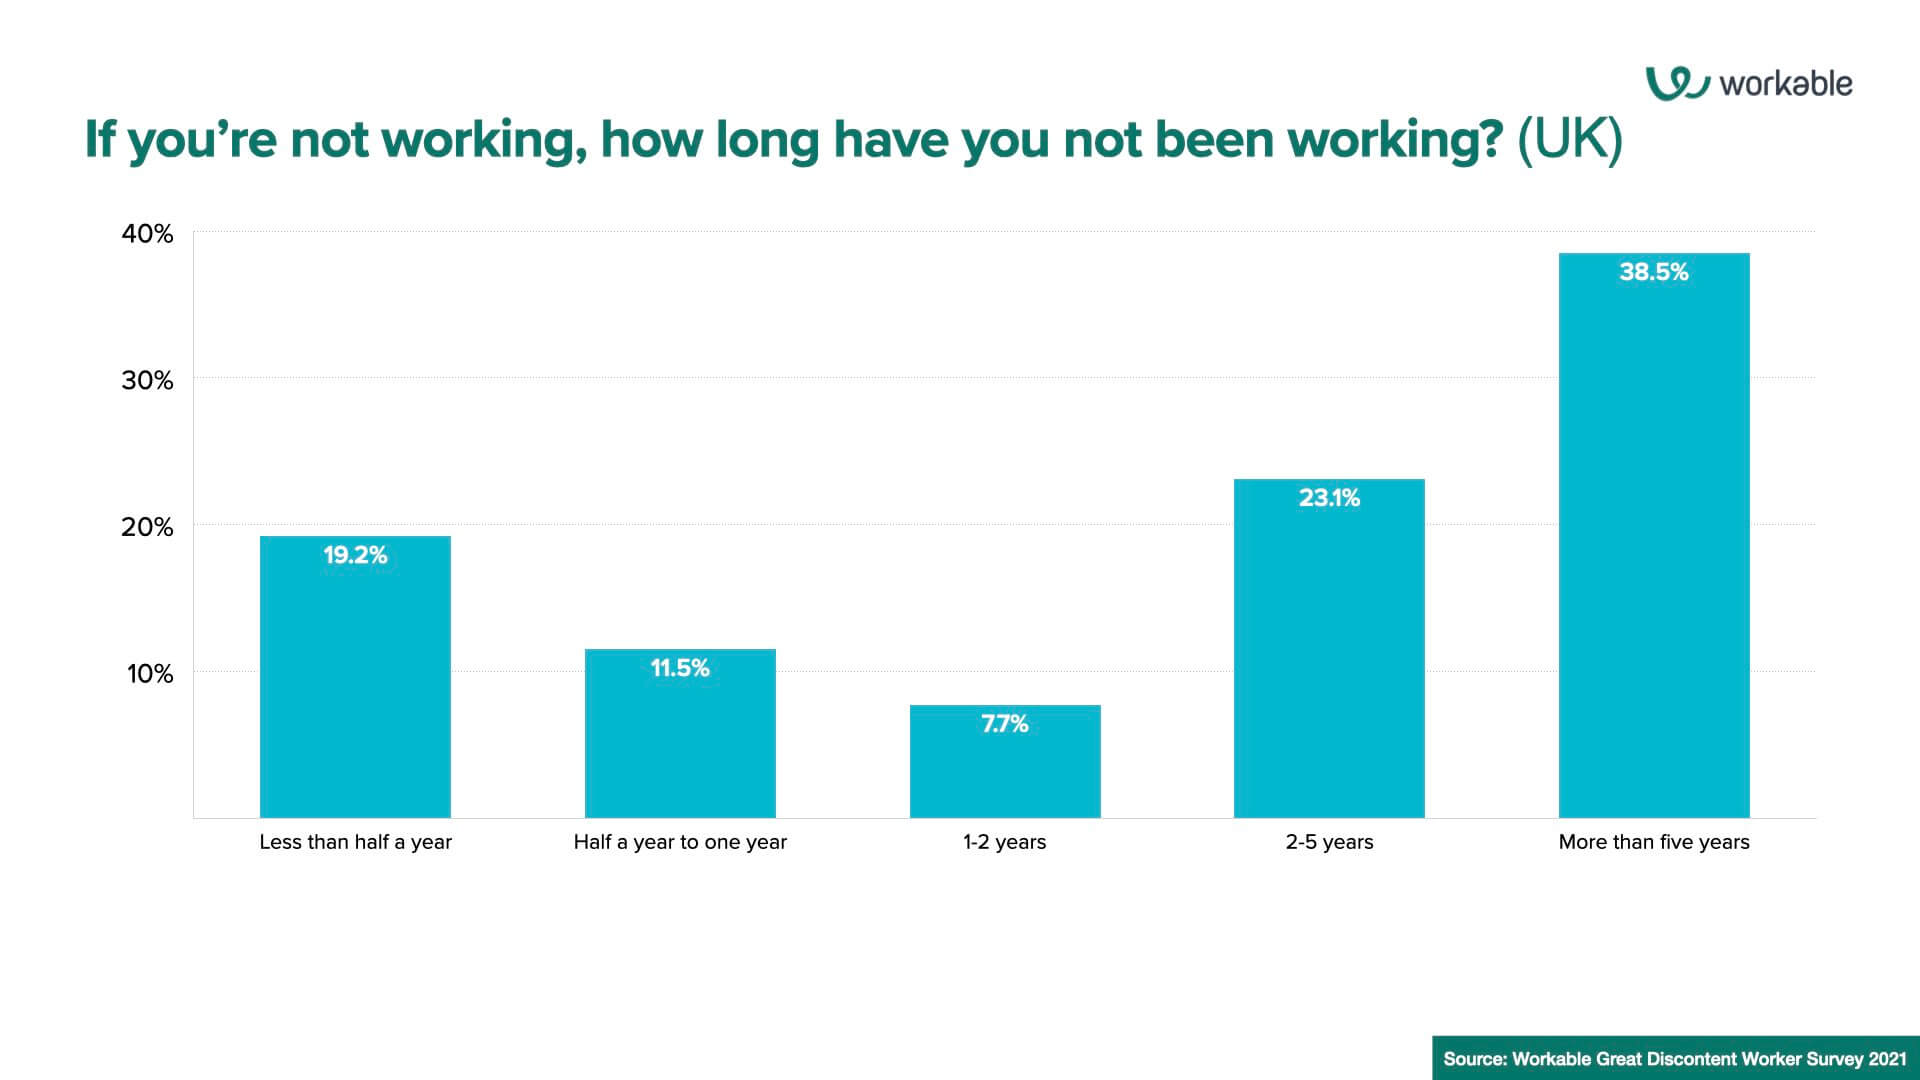 Great Discontent: If you’re not working, how long have you not been working? (UK)